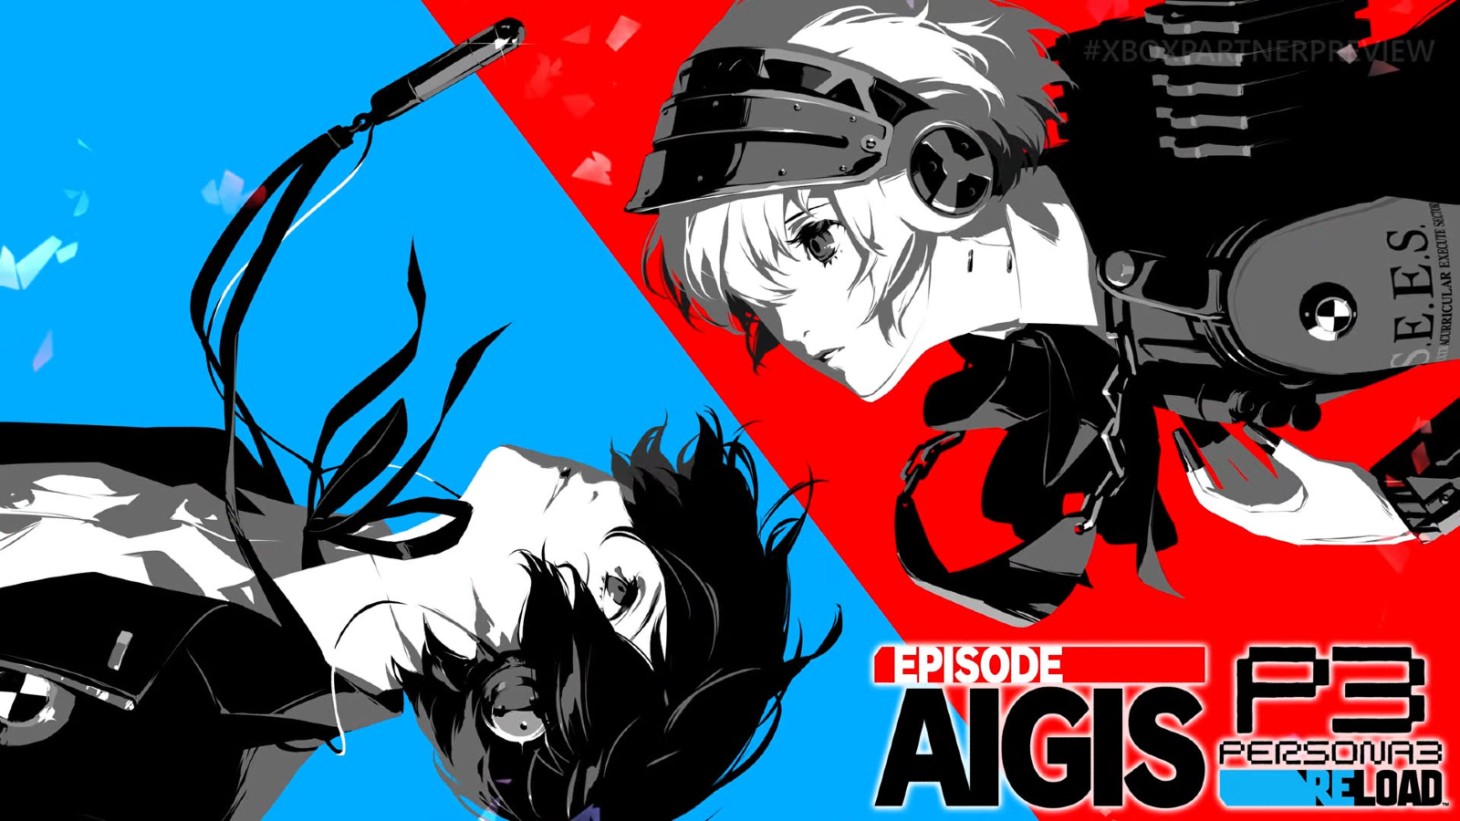 persona 3 reload episode aegis the answer dlc expansion pass